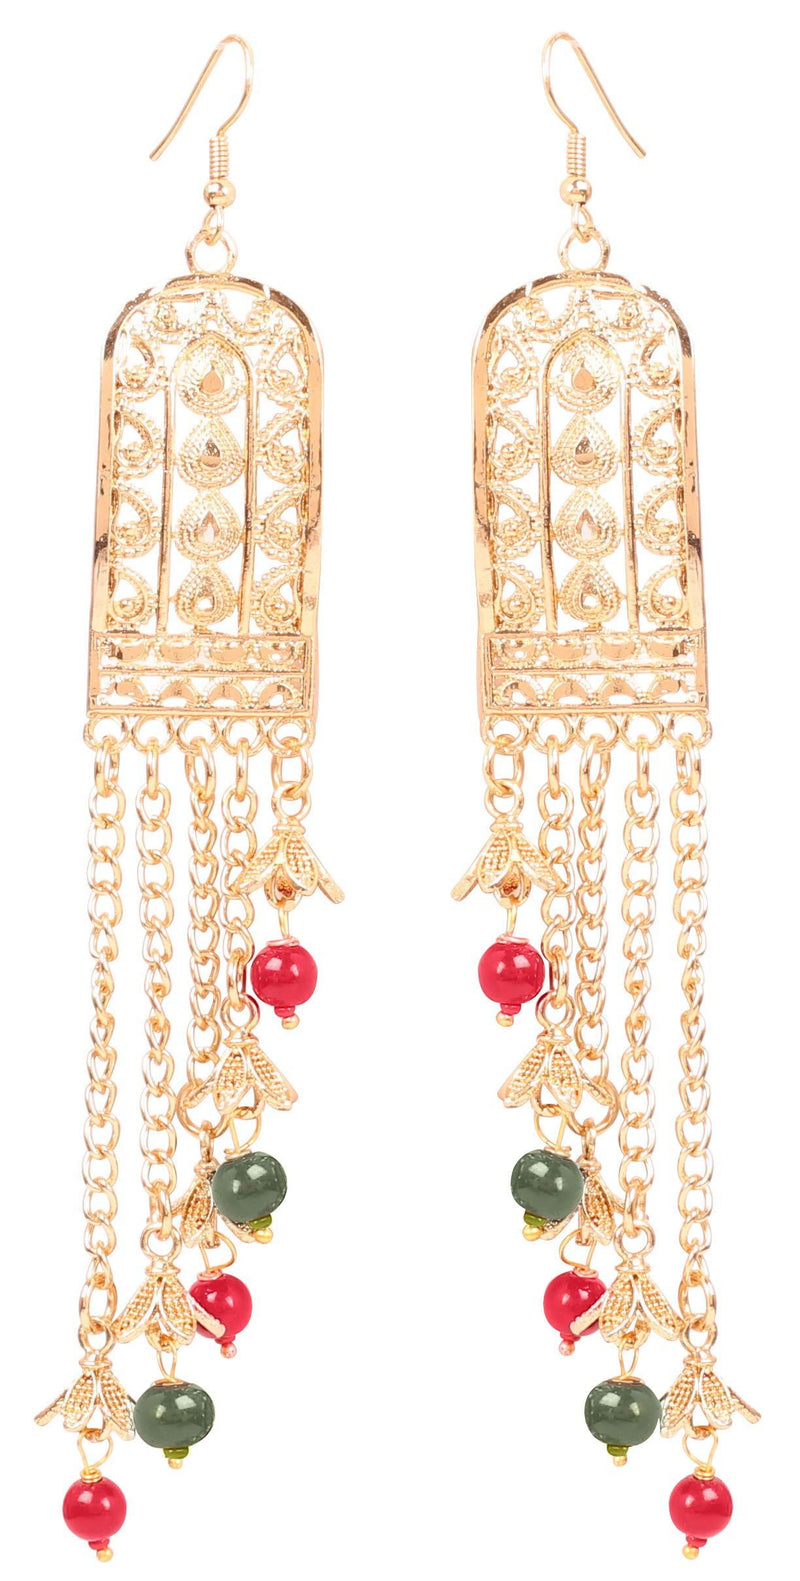 [Australia] - NEW! Touchstone"Contemporary Kundan Collection" Exotic Indian Bollywood Desire Royal Mughal Kundan Polki Look Floral Faux Ruby Jewelry Chandelier Earrings In Gold Tone For Women Multicolor 1 